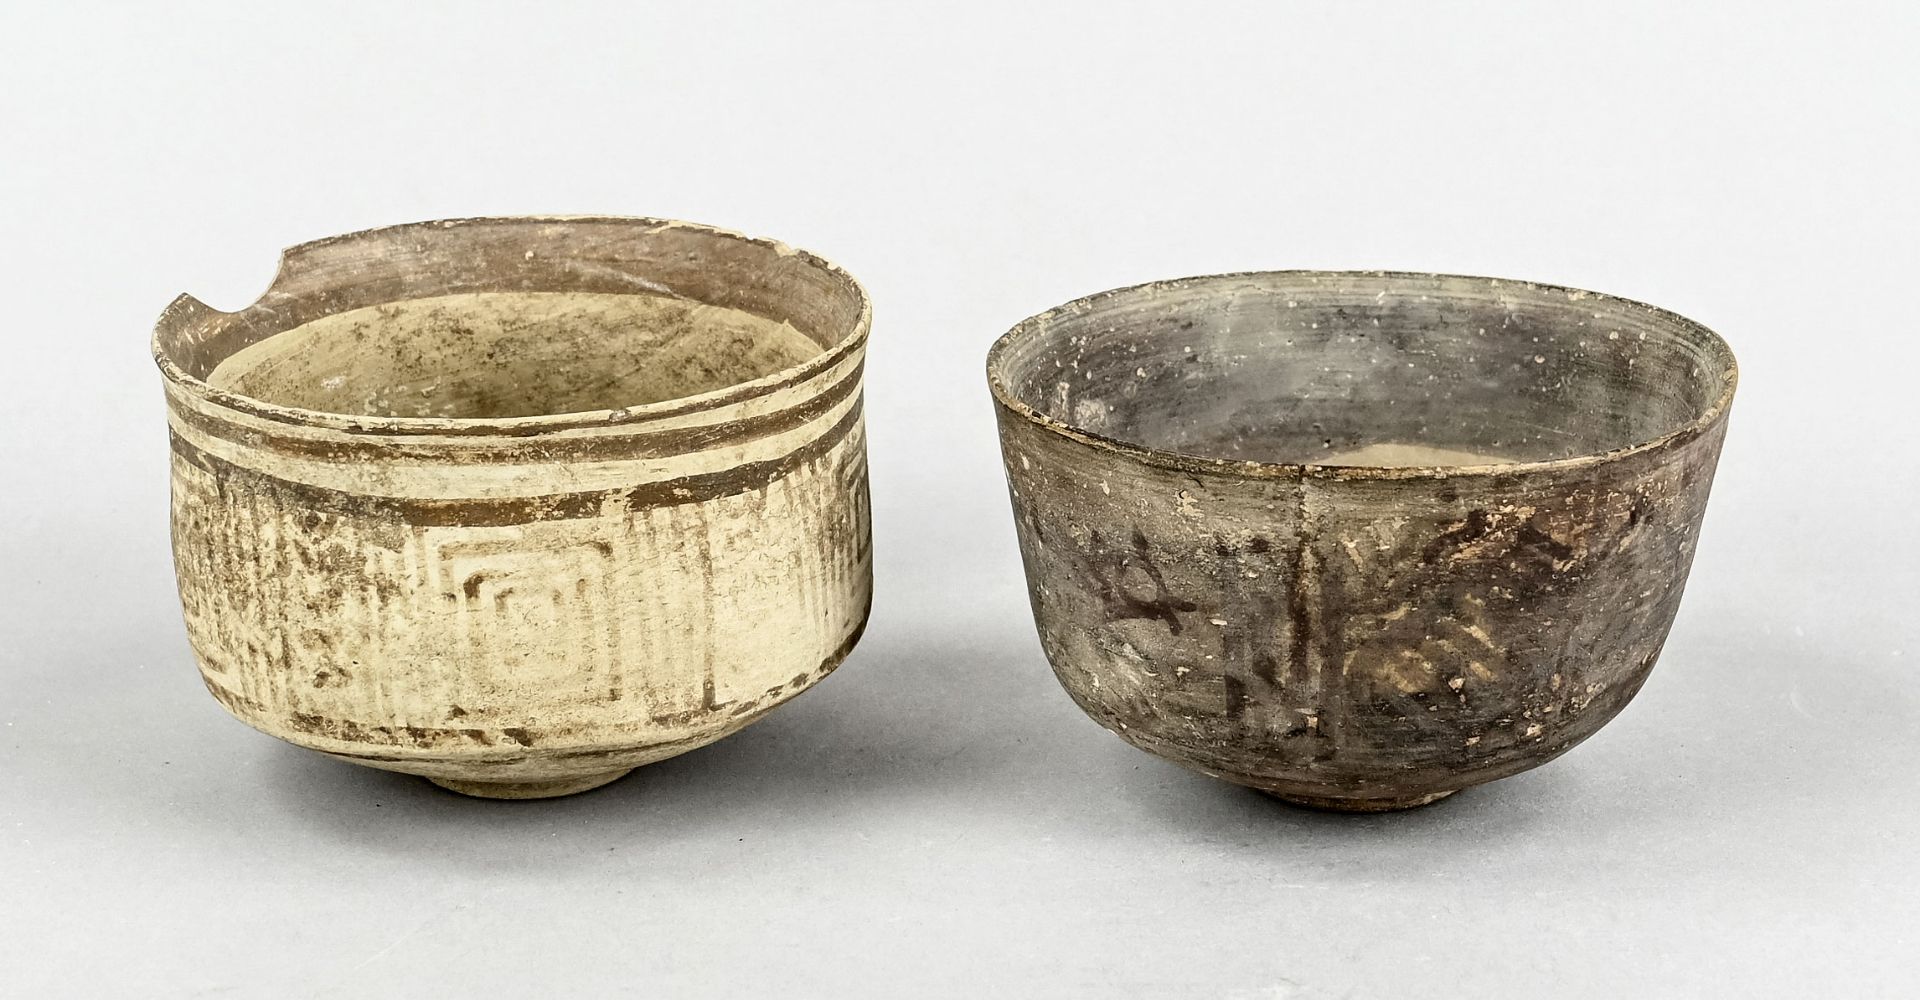 Drinking bowl, probably Anatolia, geometric decorations, 6 x 8,5 cm and 5,2 x 9,5 cm respectively - Image 2 of 3